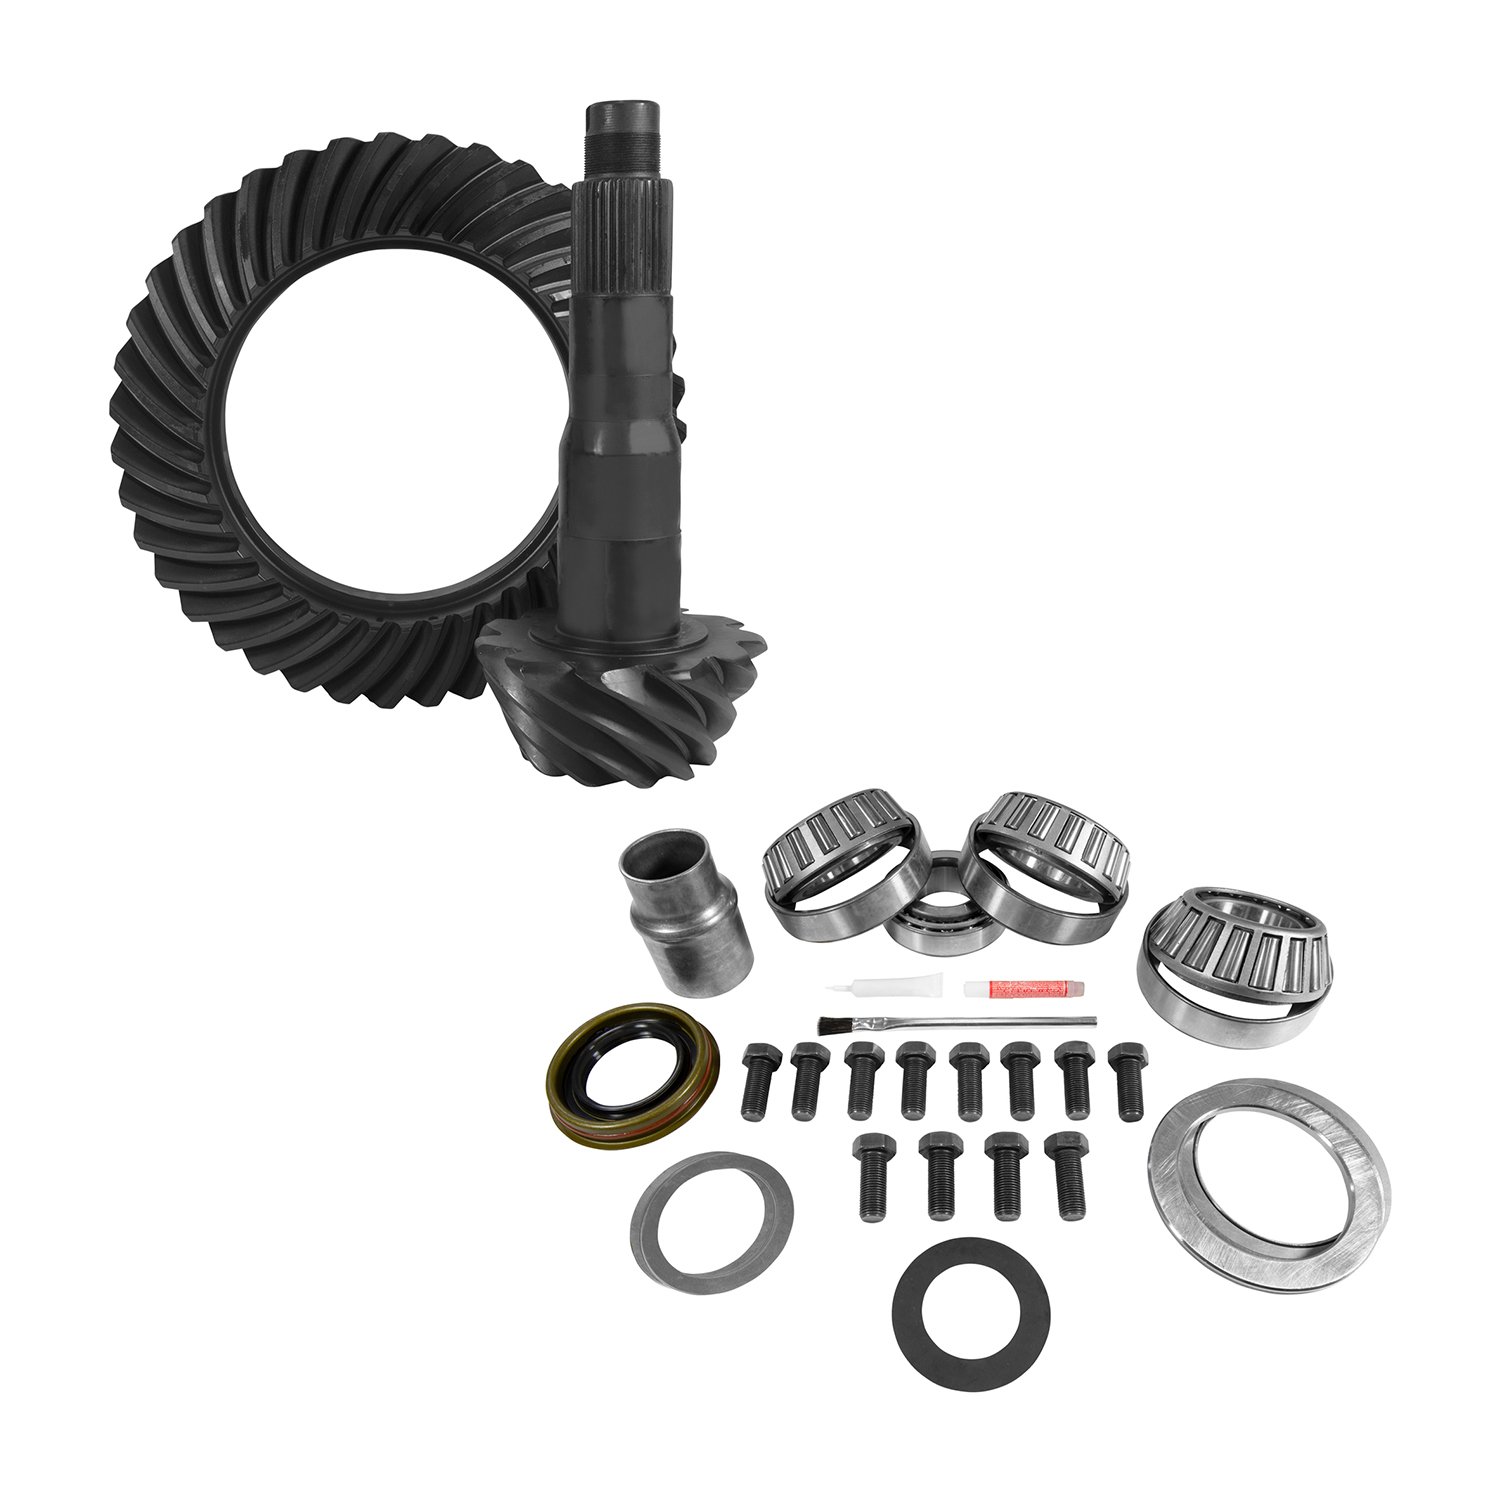 USA Standard 10862 10.5 in. Ford 4.30 Rear Ring & Pinion And Install Kit